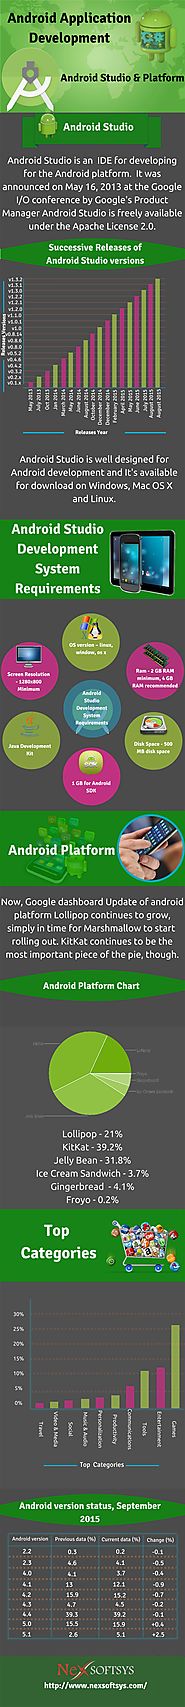 Android Application Development by Nexsoftsys